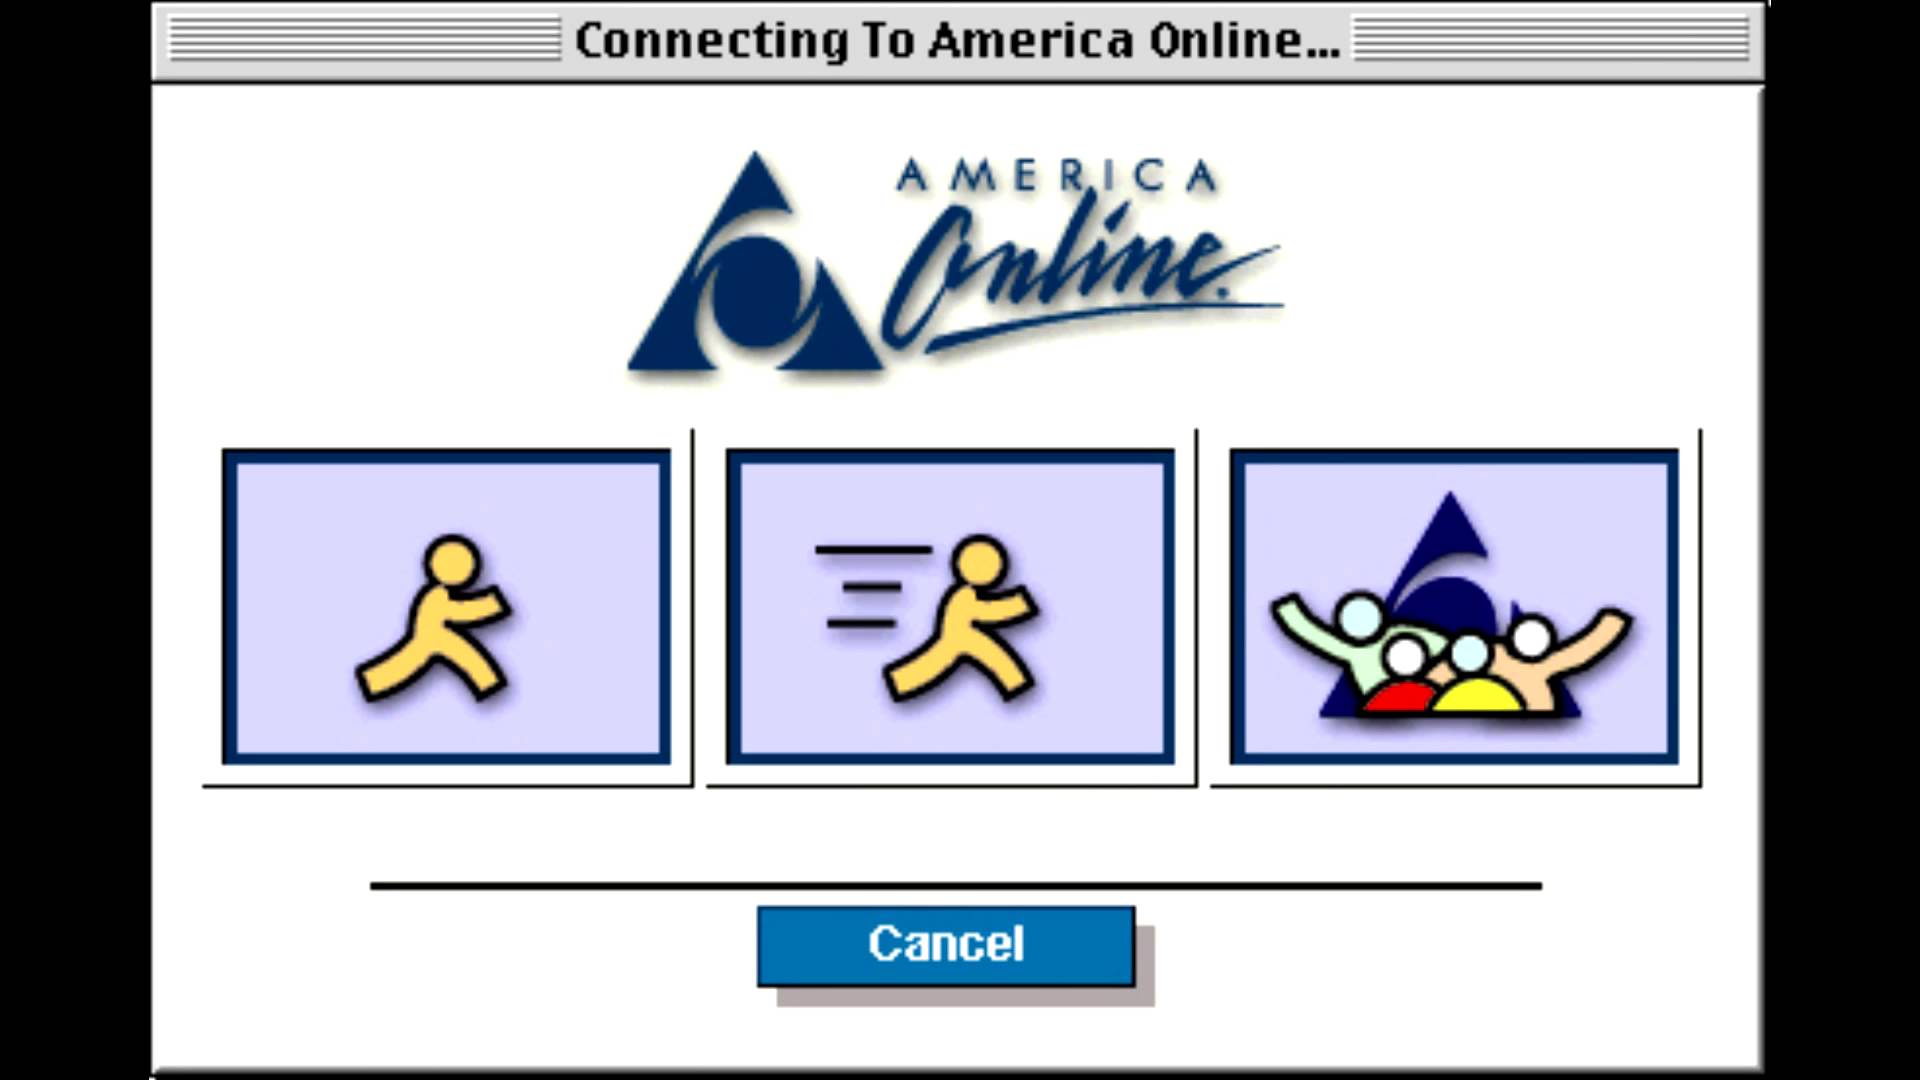 Can You Believe People Still Go Through This Aol